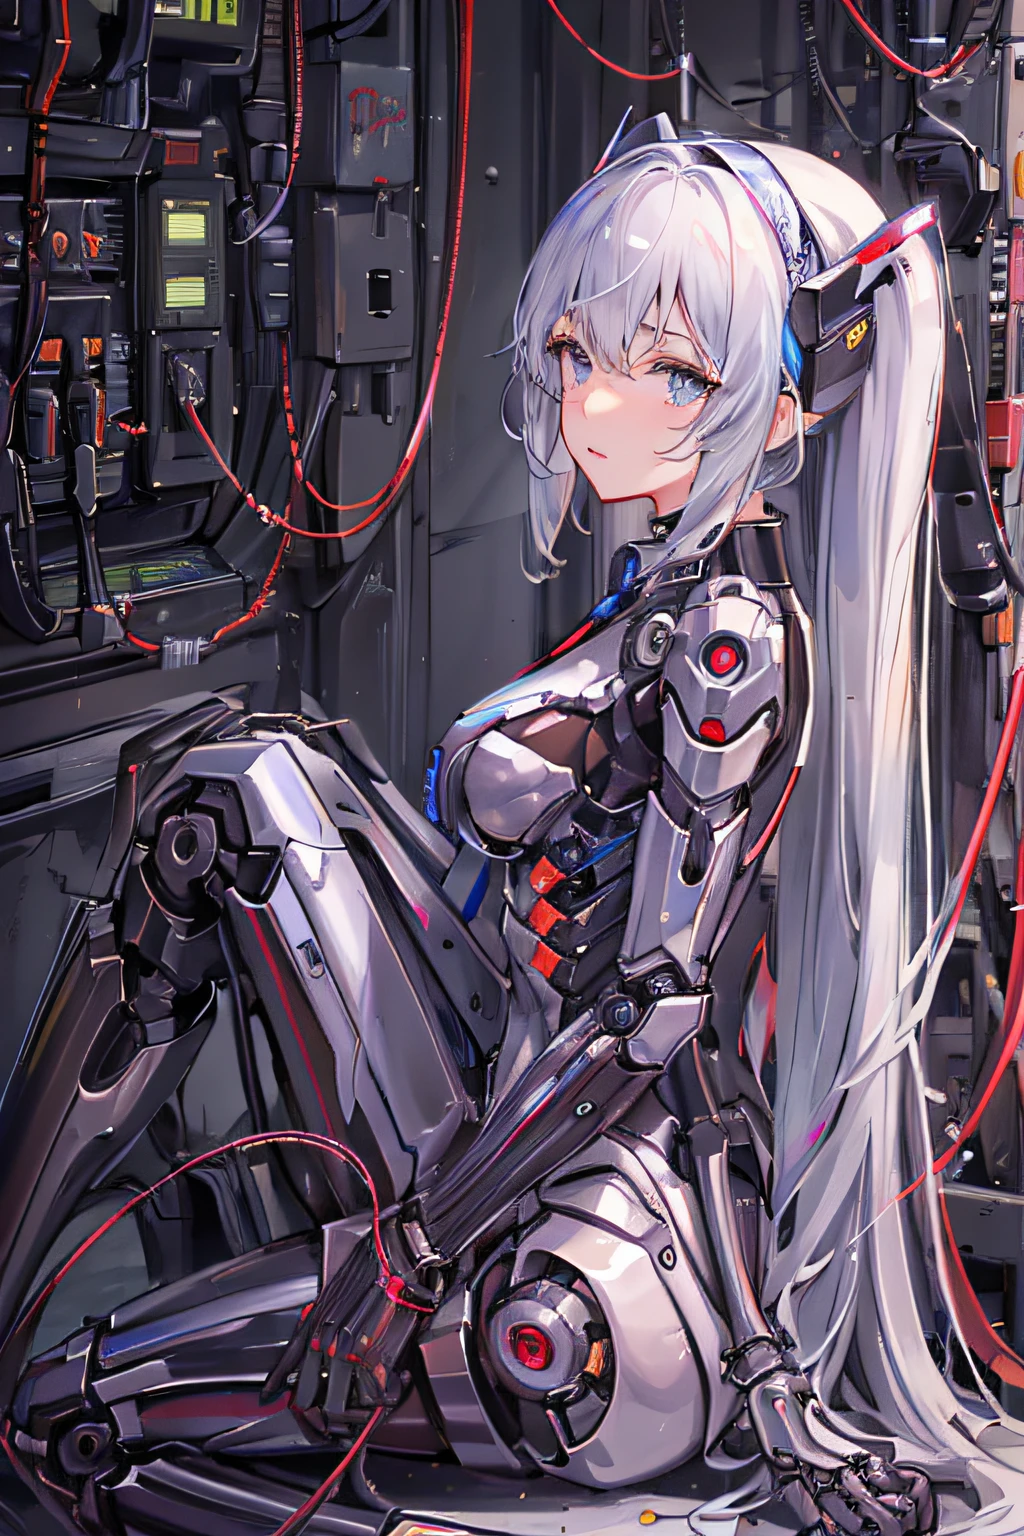 Anime fille sitting on the ground with a robot in front of her, cyborg - fille with silver hair, oppai biomécanique, Cute cyborg fille, Cyborg fille, beautiful fille cyborg, femme cyborg anime parfaite, perfect android fille, Cyborg - Fille, Anime Cyborg, beutiful white fille cyborg, entièrement robotique!! fille, Cyberpunk anime fille mecha